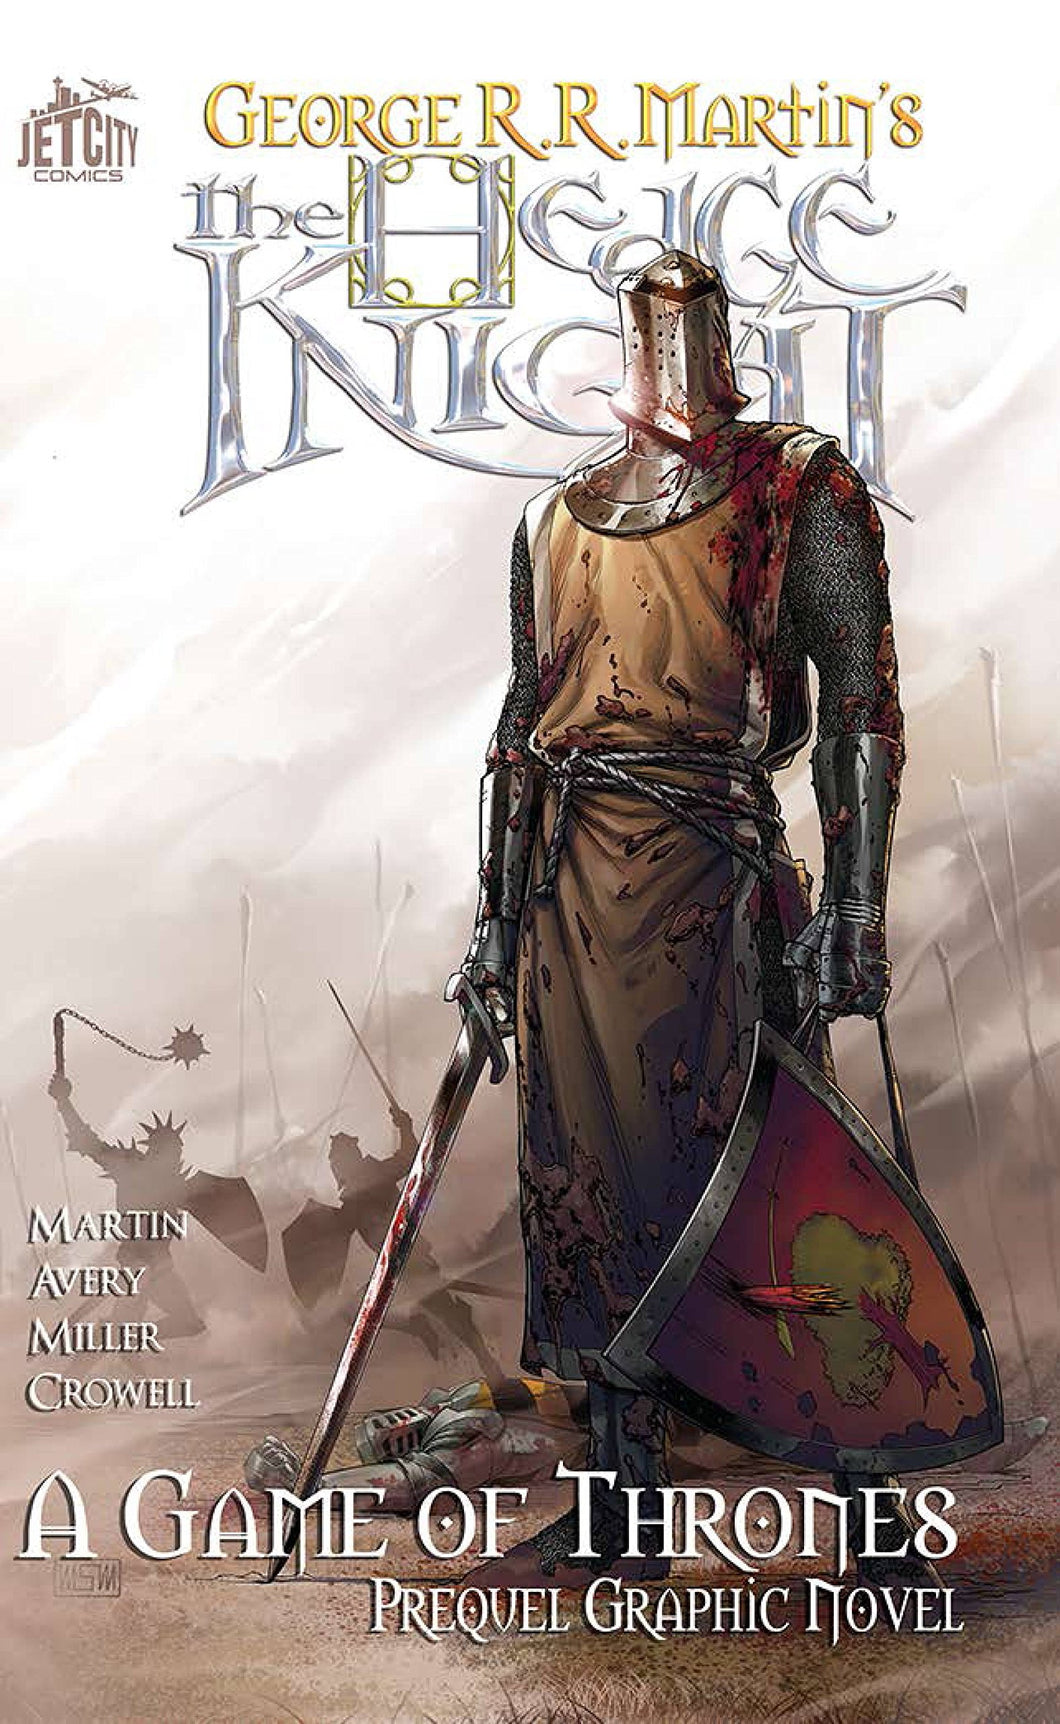 The Hedge Knight: The Graphic Novel (Game of Thrones)